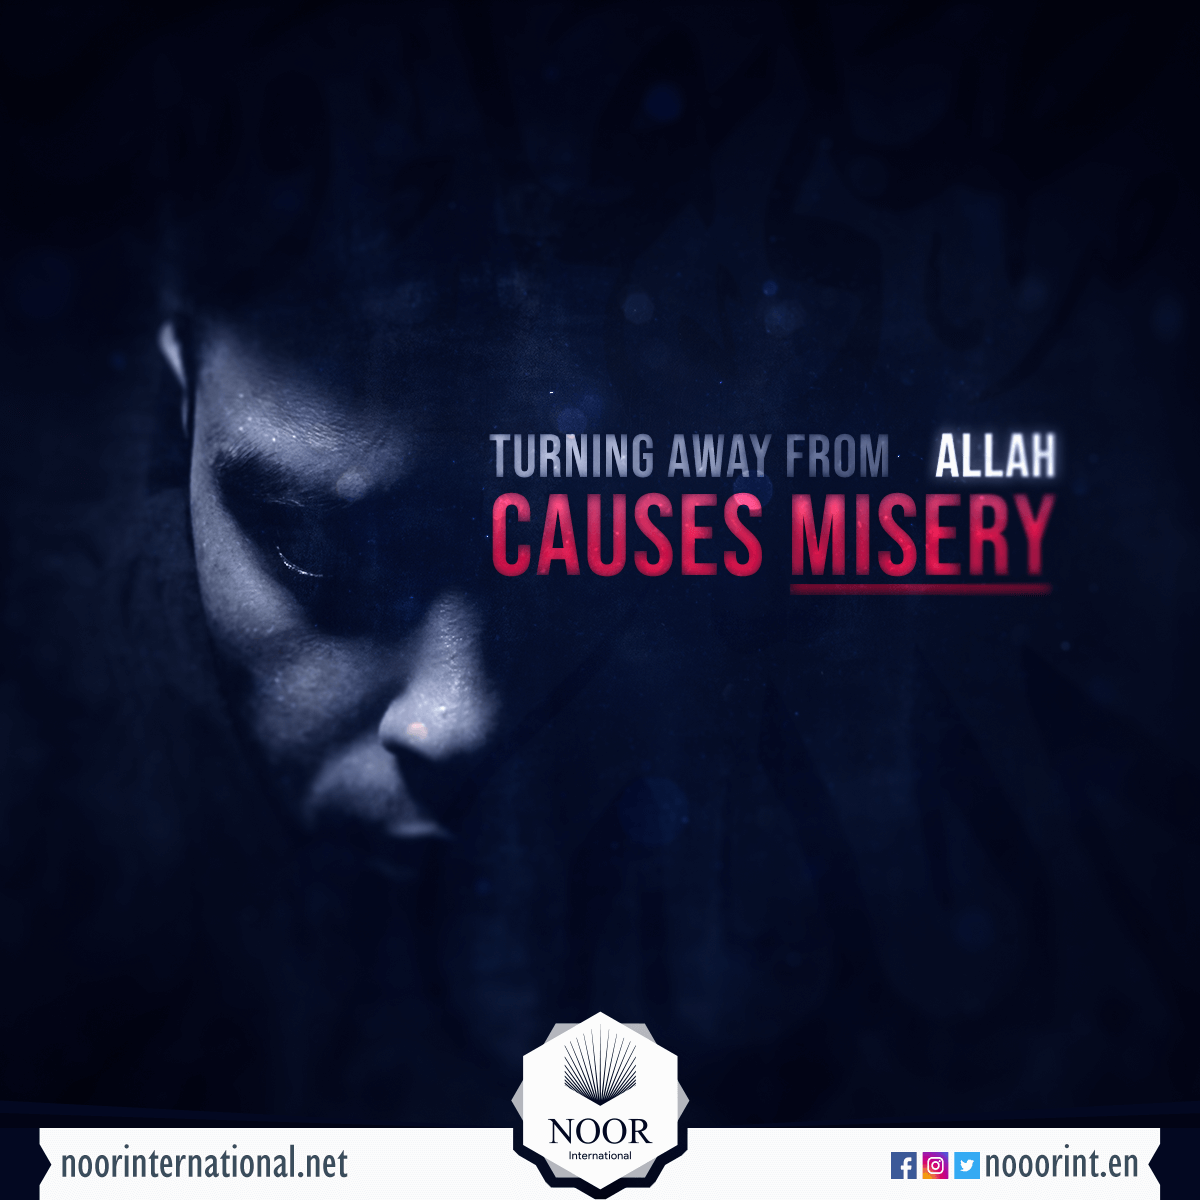 Turning away from Allah causes misery